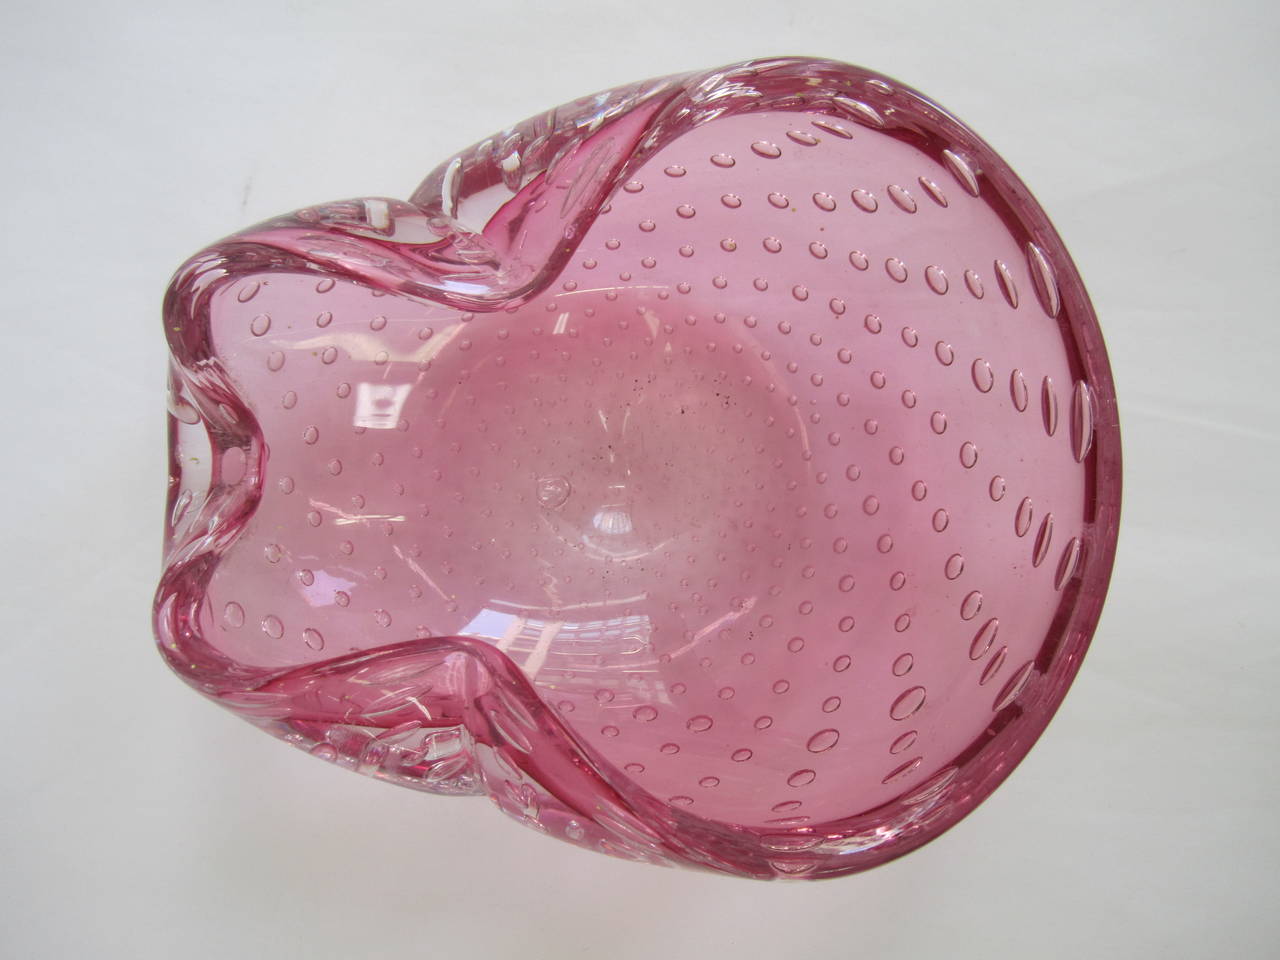 A beautiful mid-20th century Italian Murano art glass bowl in a red/pink raspberry hue with a controlled bubble design, circa 1960s, Italy. Bowl is a nice size measuring: 6